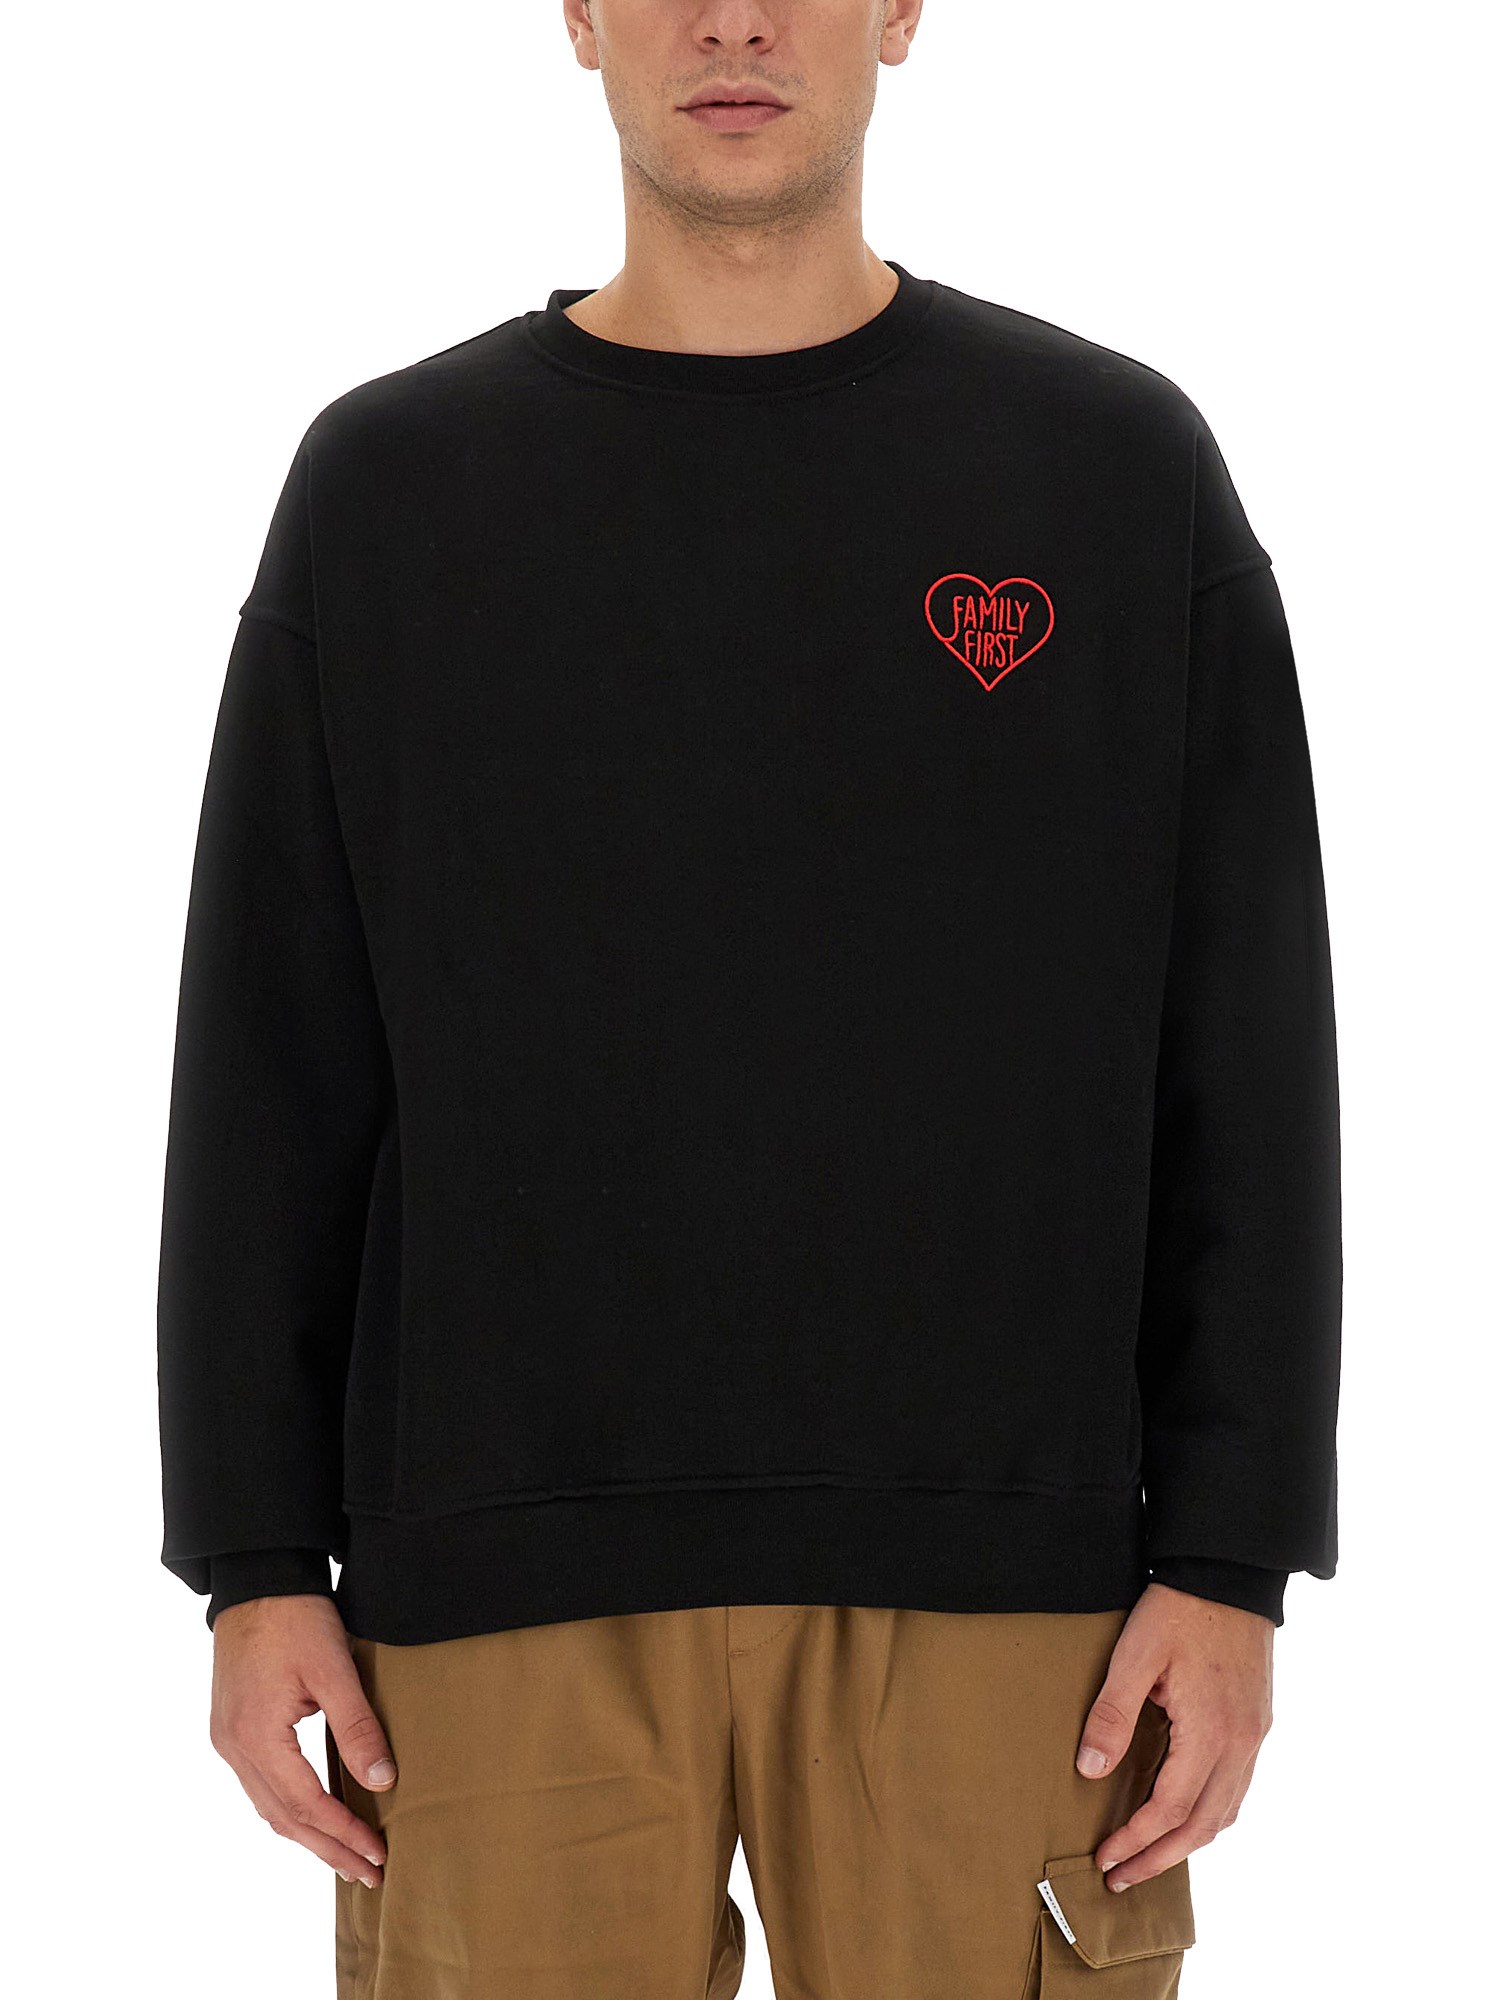 family first sweatshirt with logo